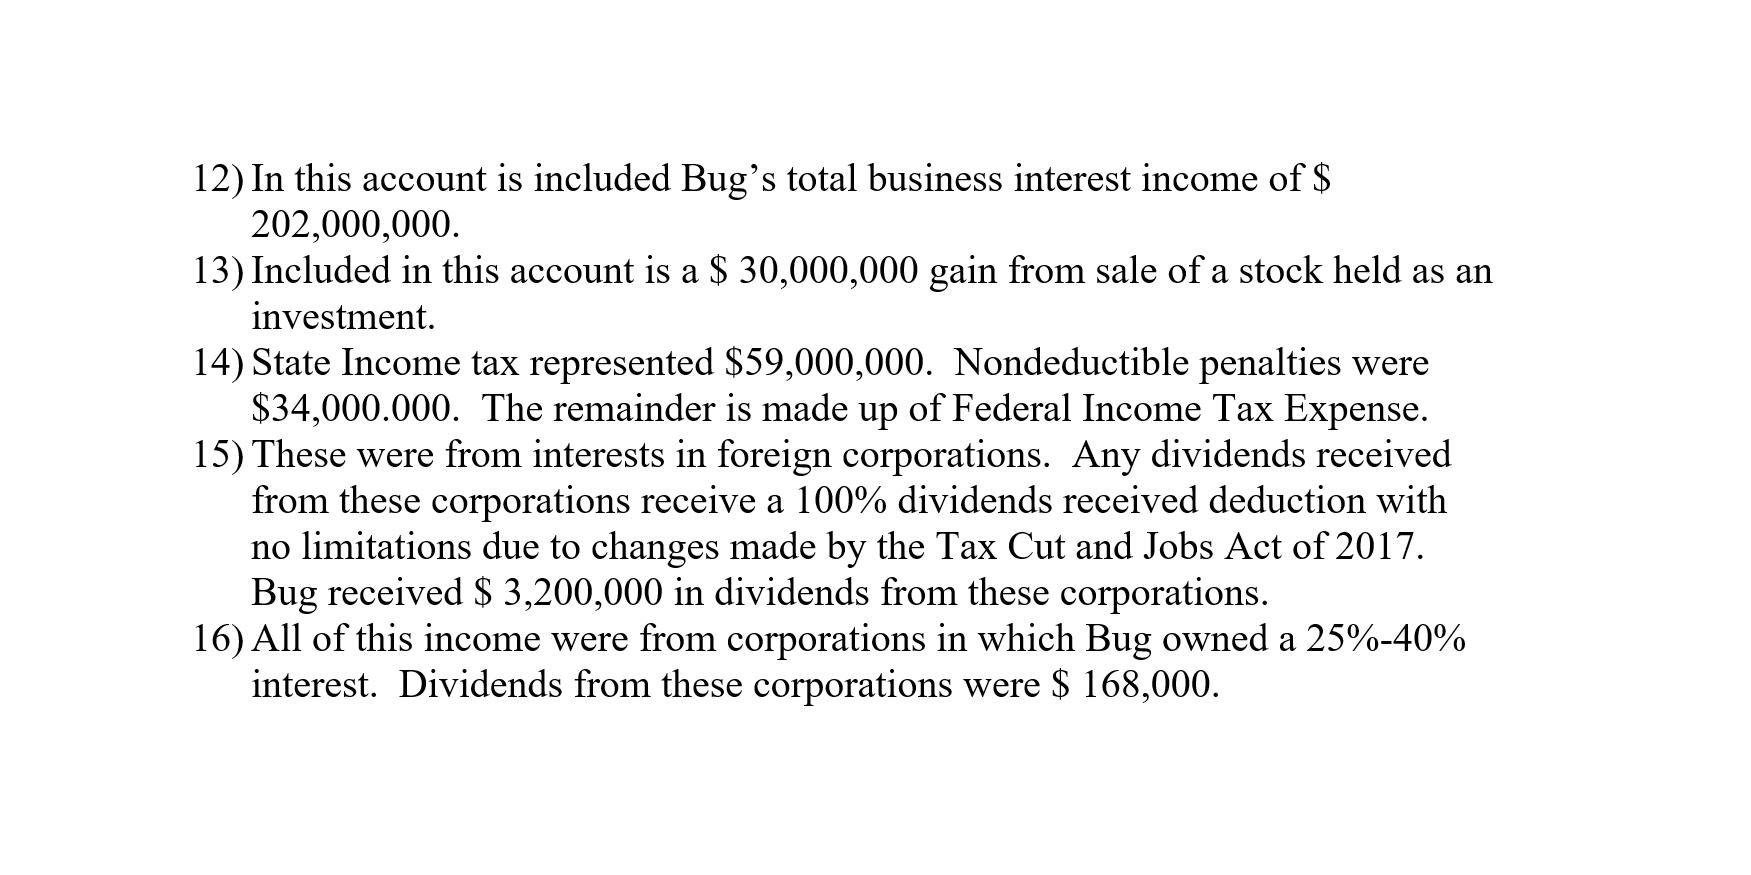 12) In this account is included Bugs total business interest income of $ 202,000,000 13) Included in this account is a $ 30,